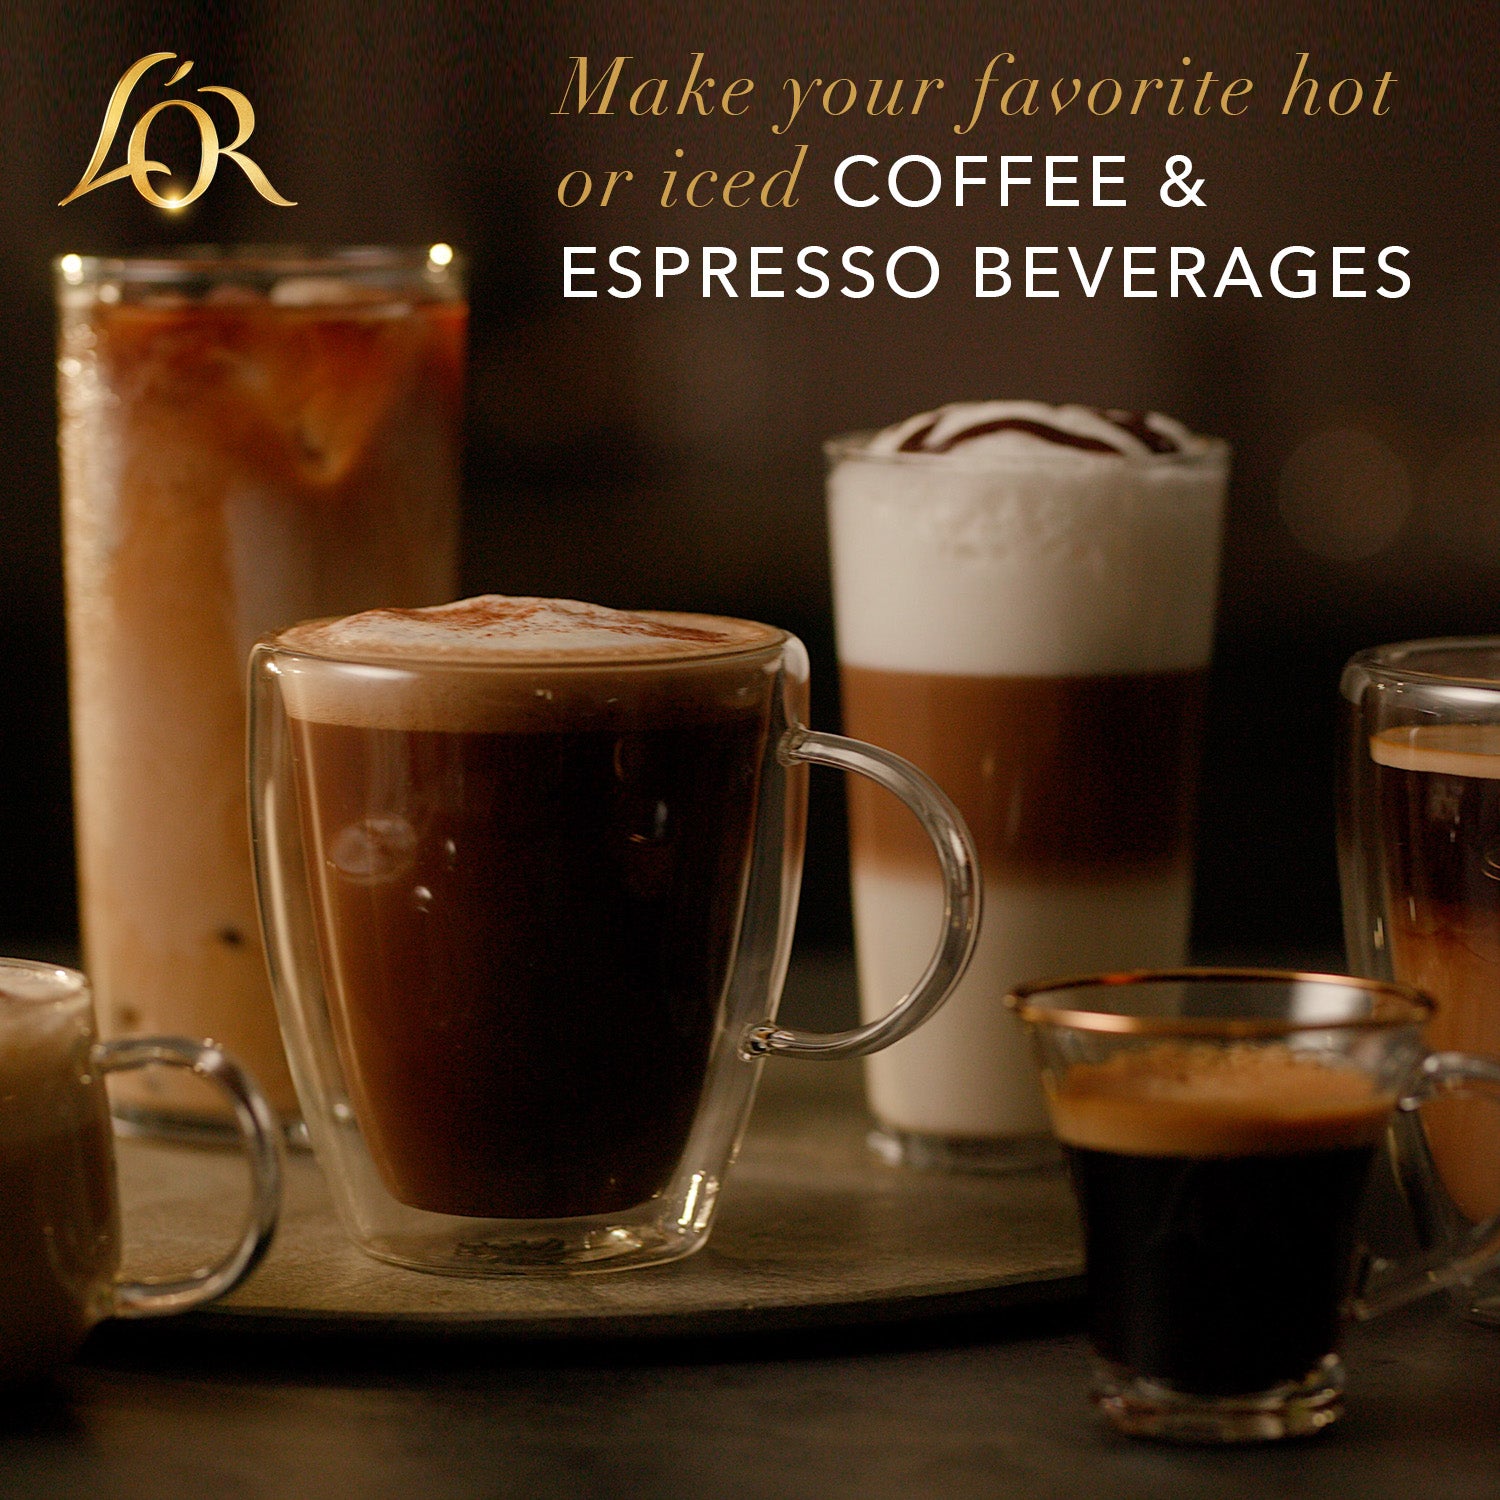 Make your favorite hot or iced coffee beverages.